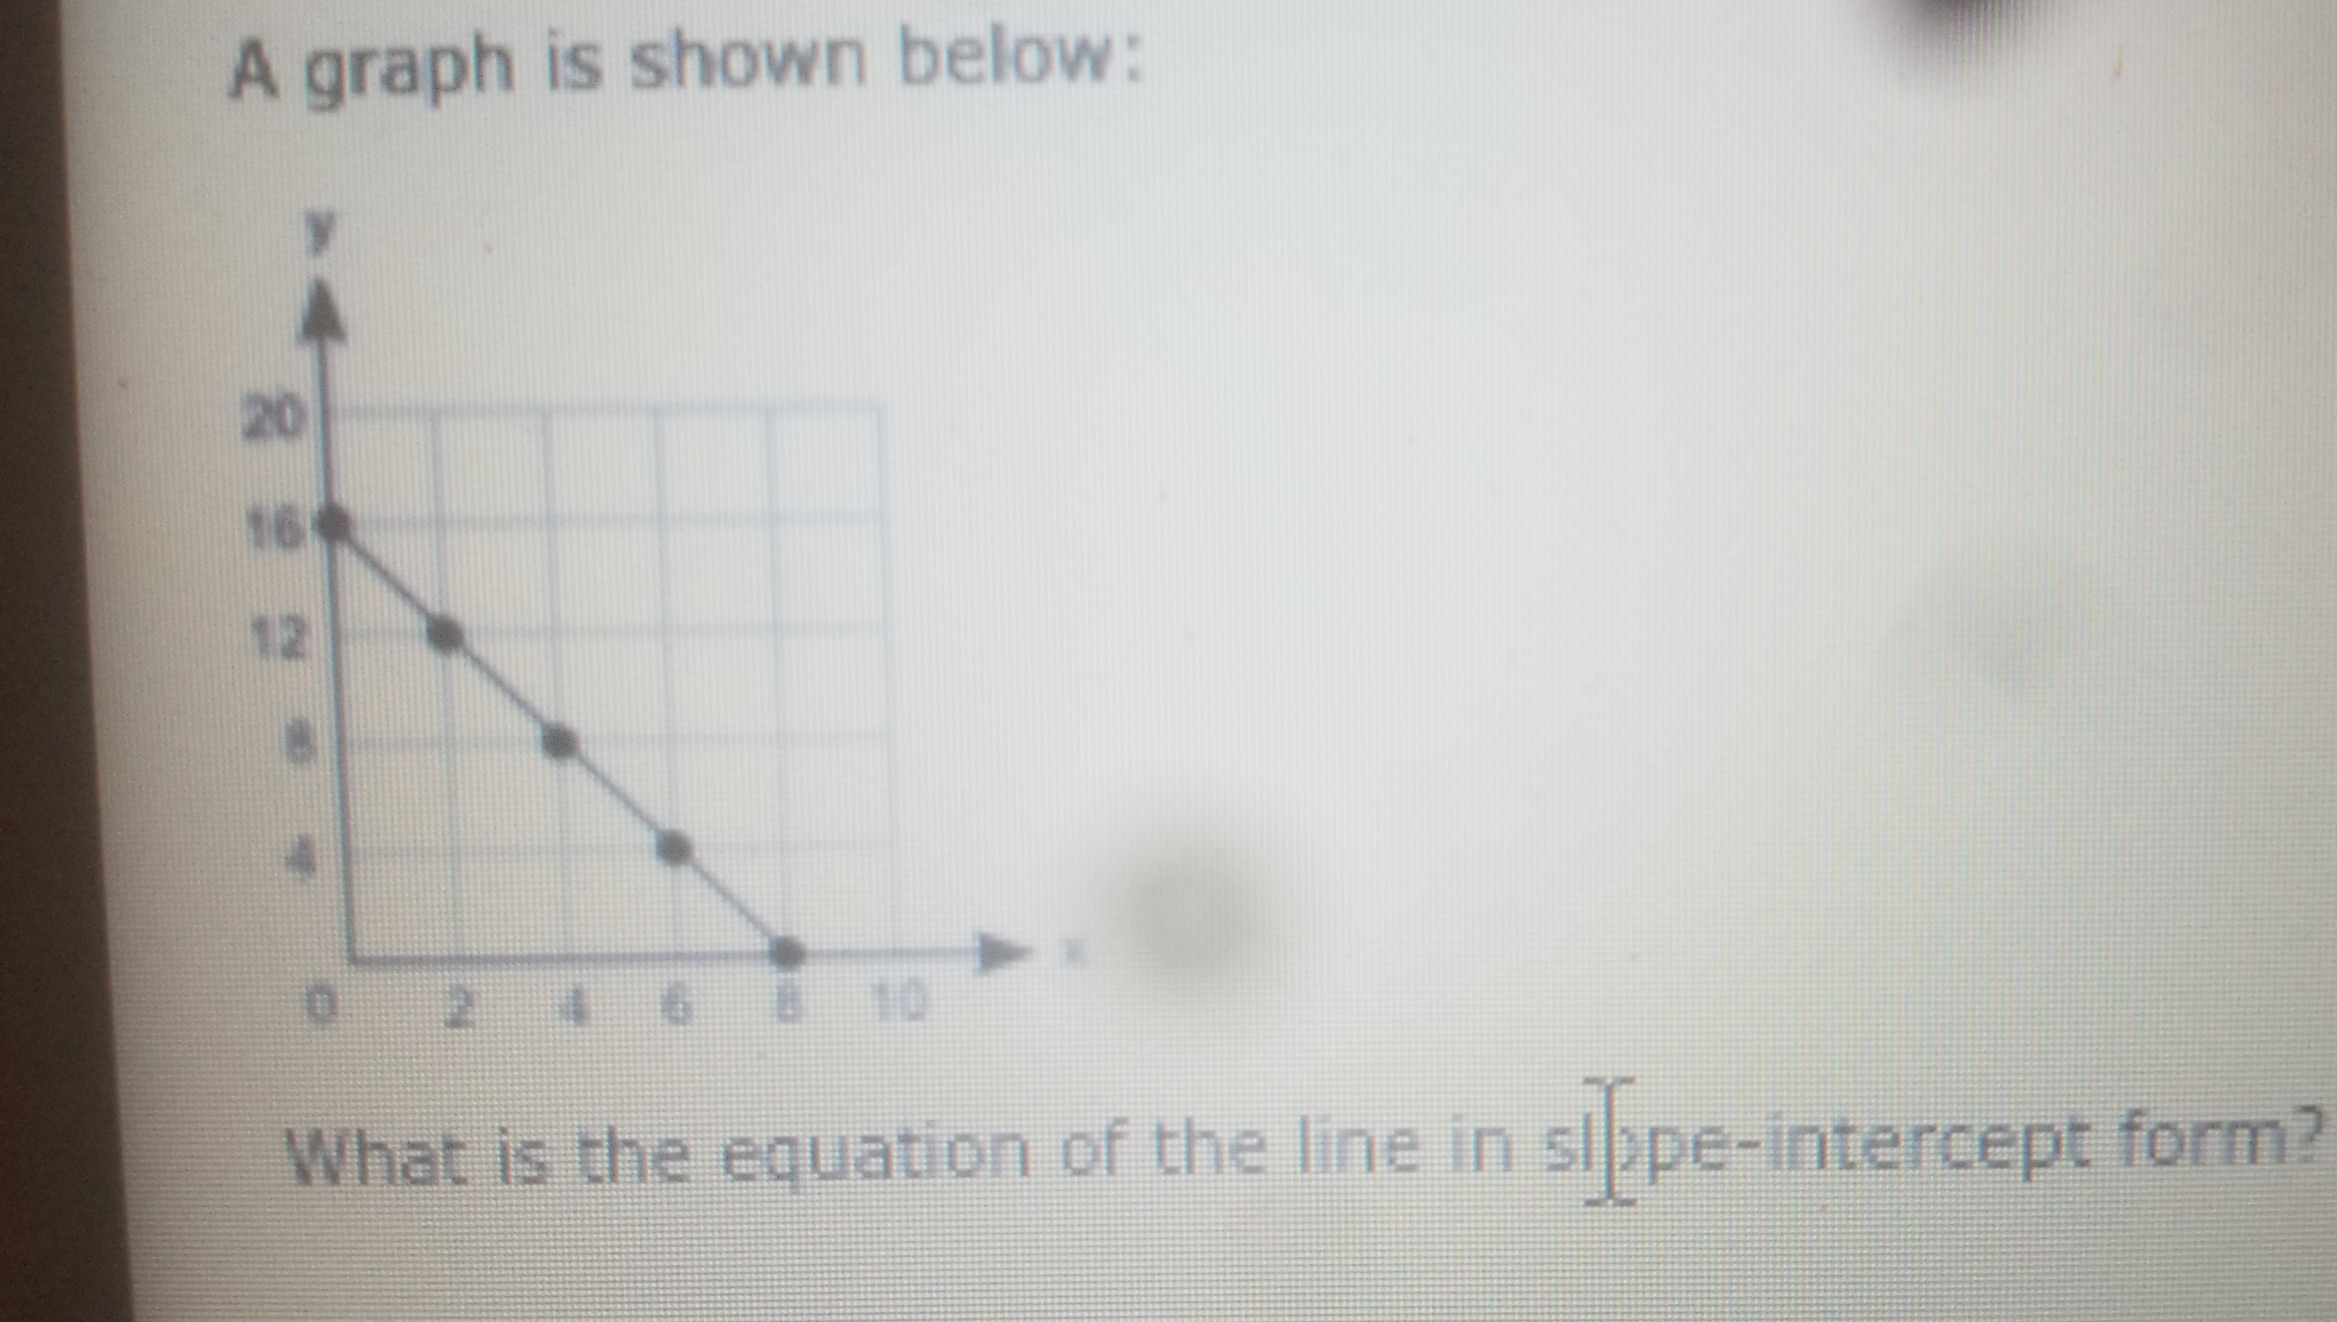 A graph is shown below:
20
16
12
8 10
What is the equation of the line in slppe-intercept form?
